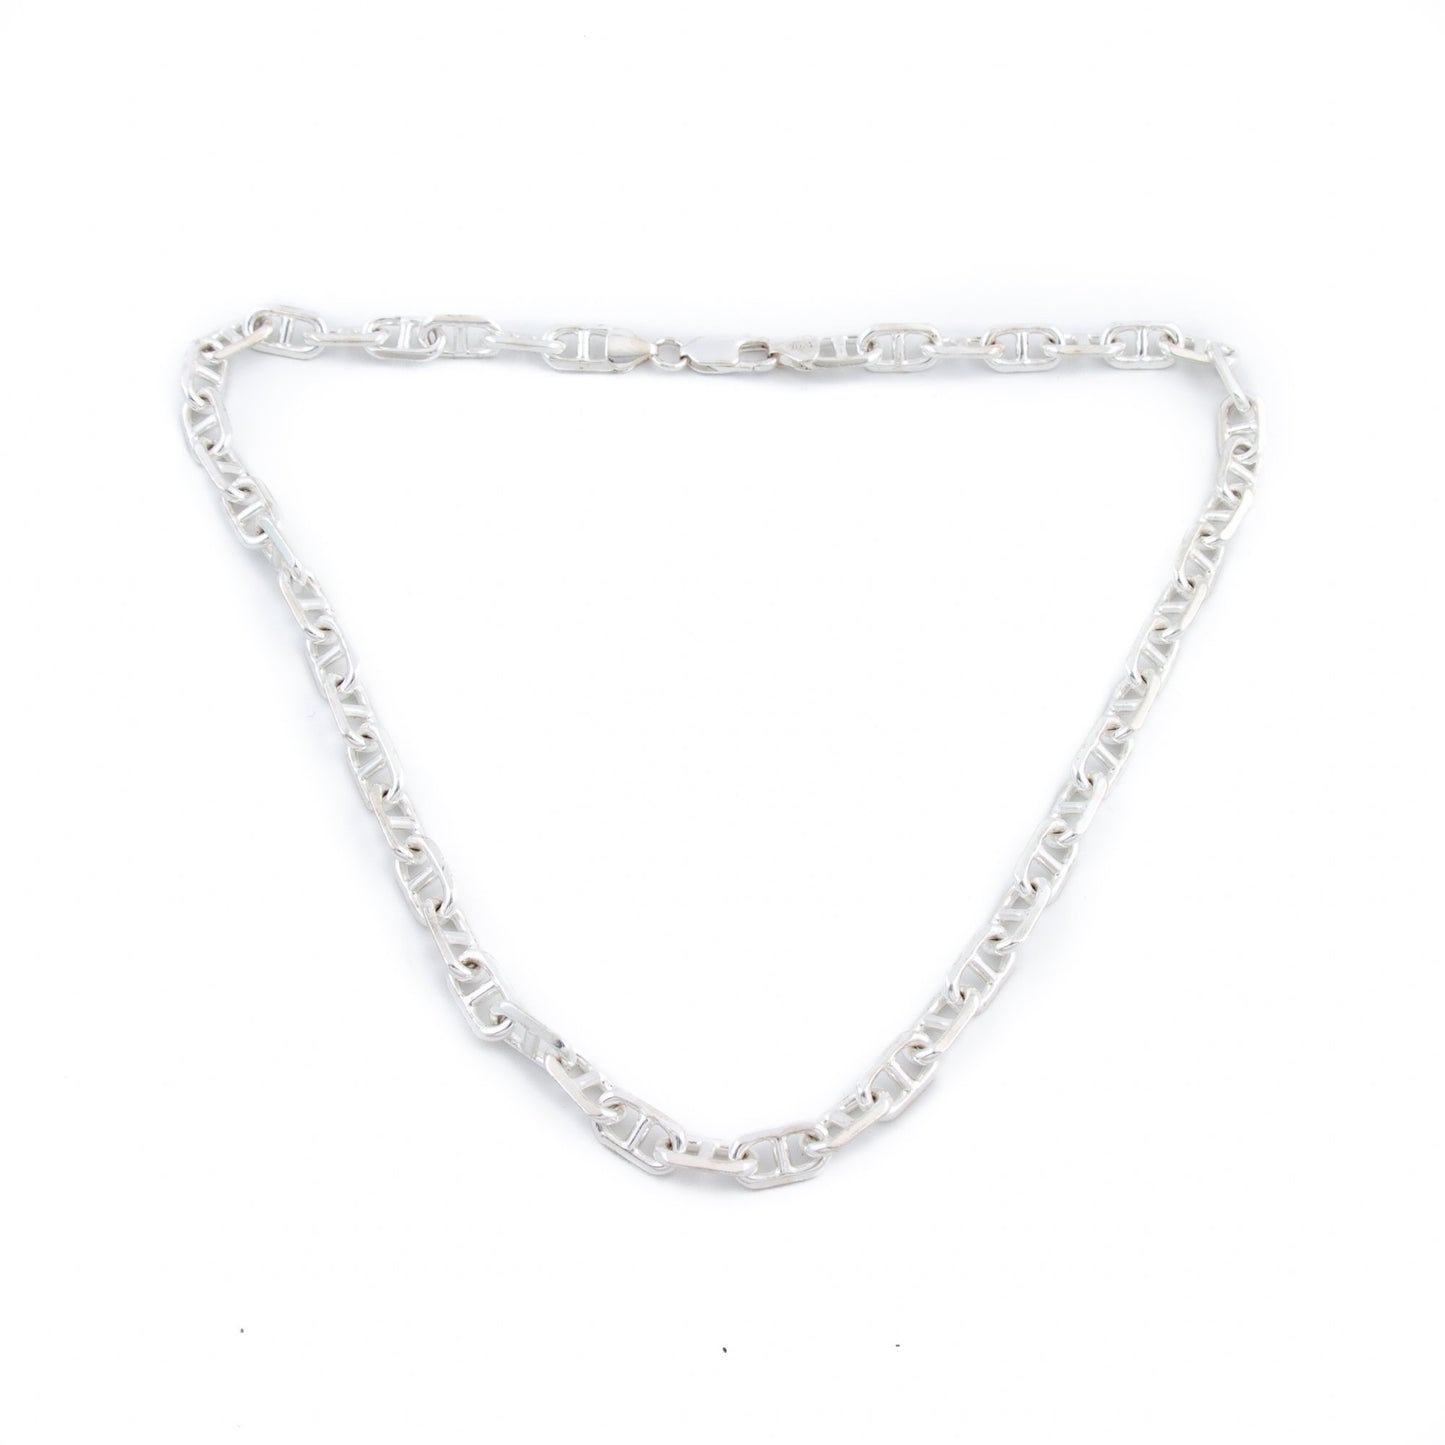 Silver Anchor Chain Necklace - Kingdom Jewelry